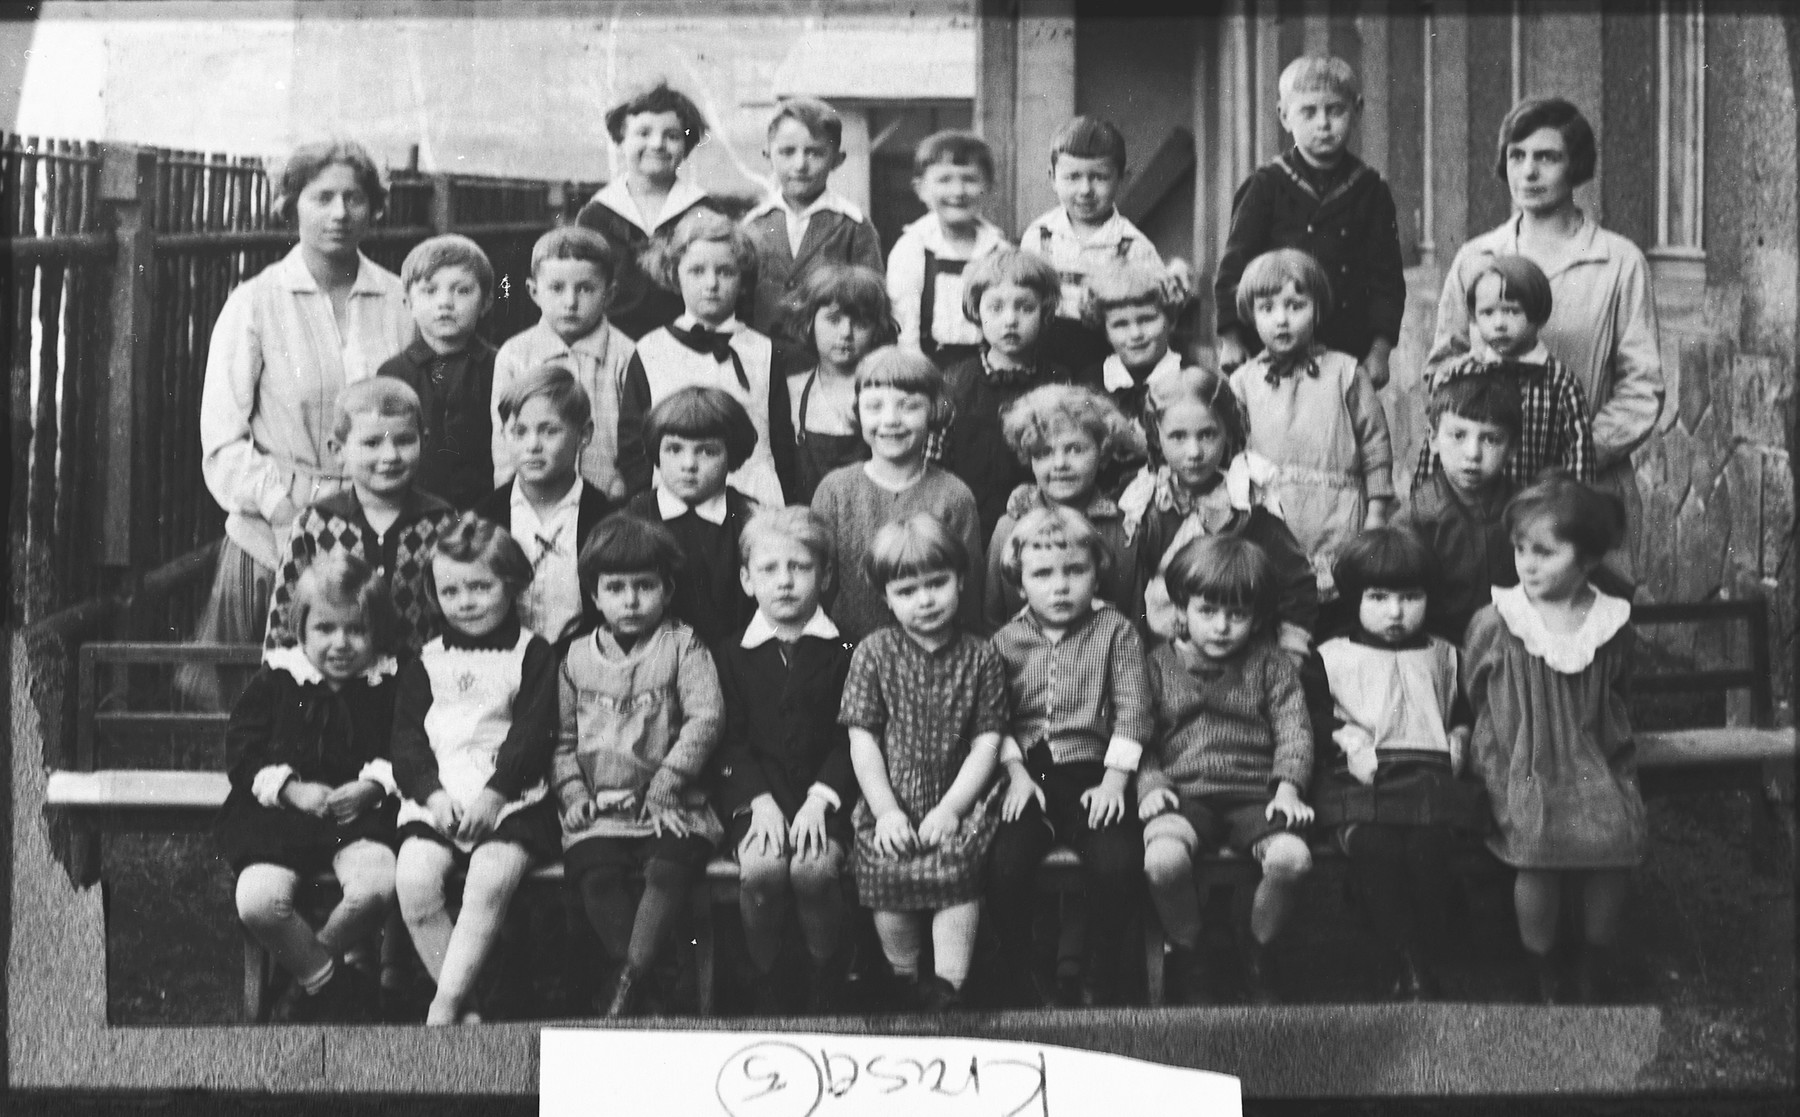 Group portrait of Czech and Jewish pupils in an elementary school in Prague.

Among those pictured is Edgar Krasa (second row from the front, second from the left).